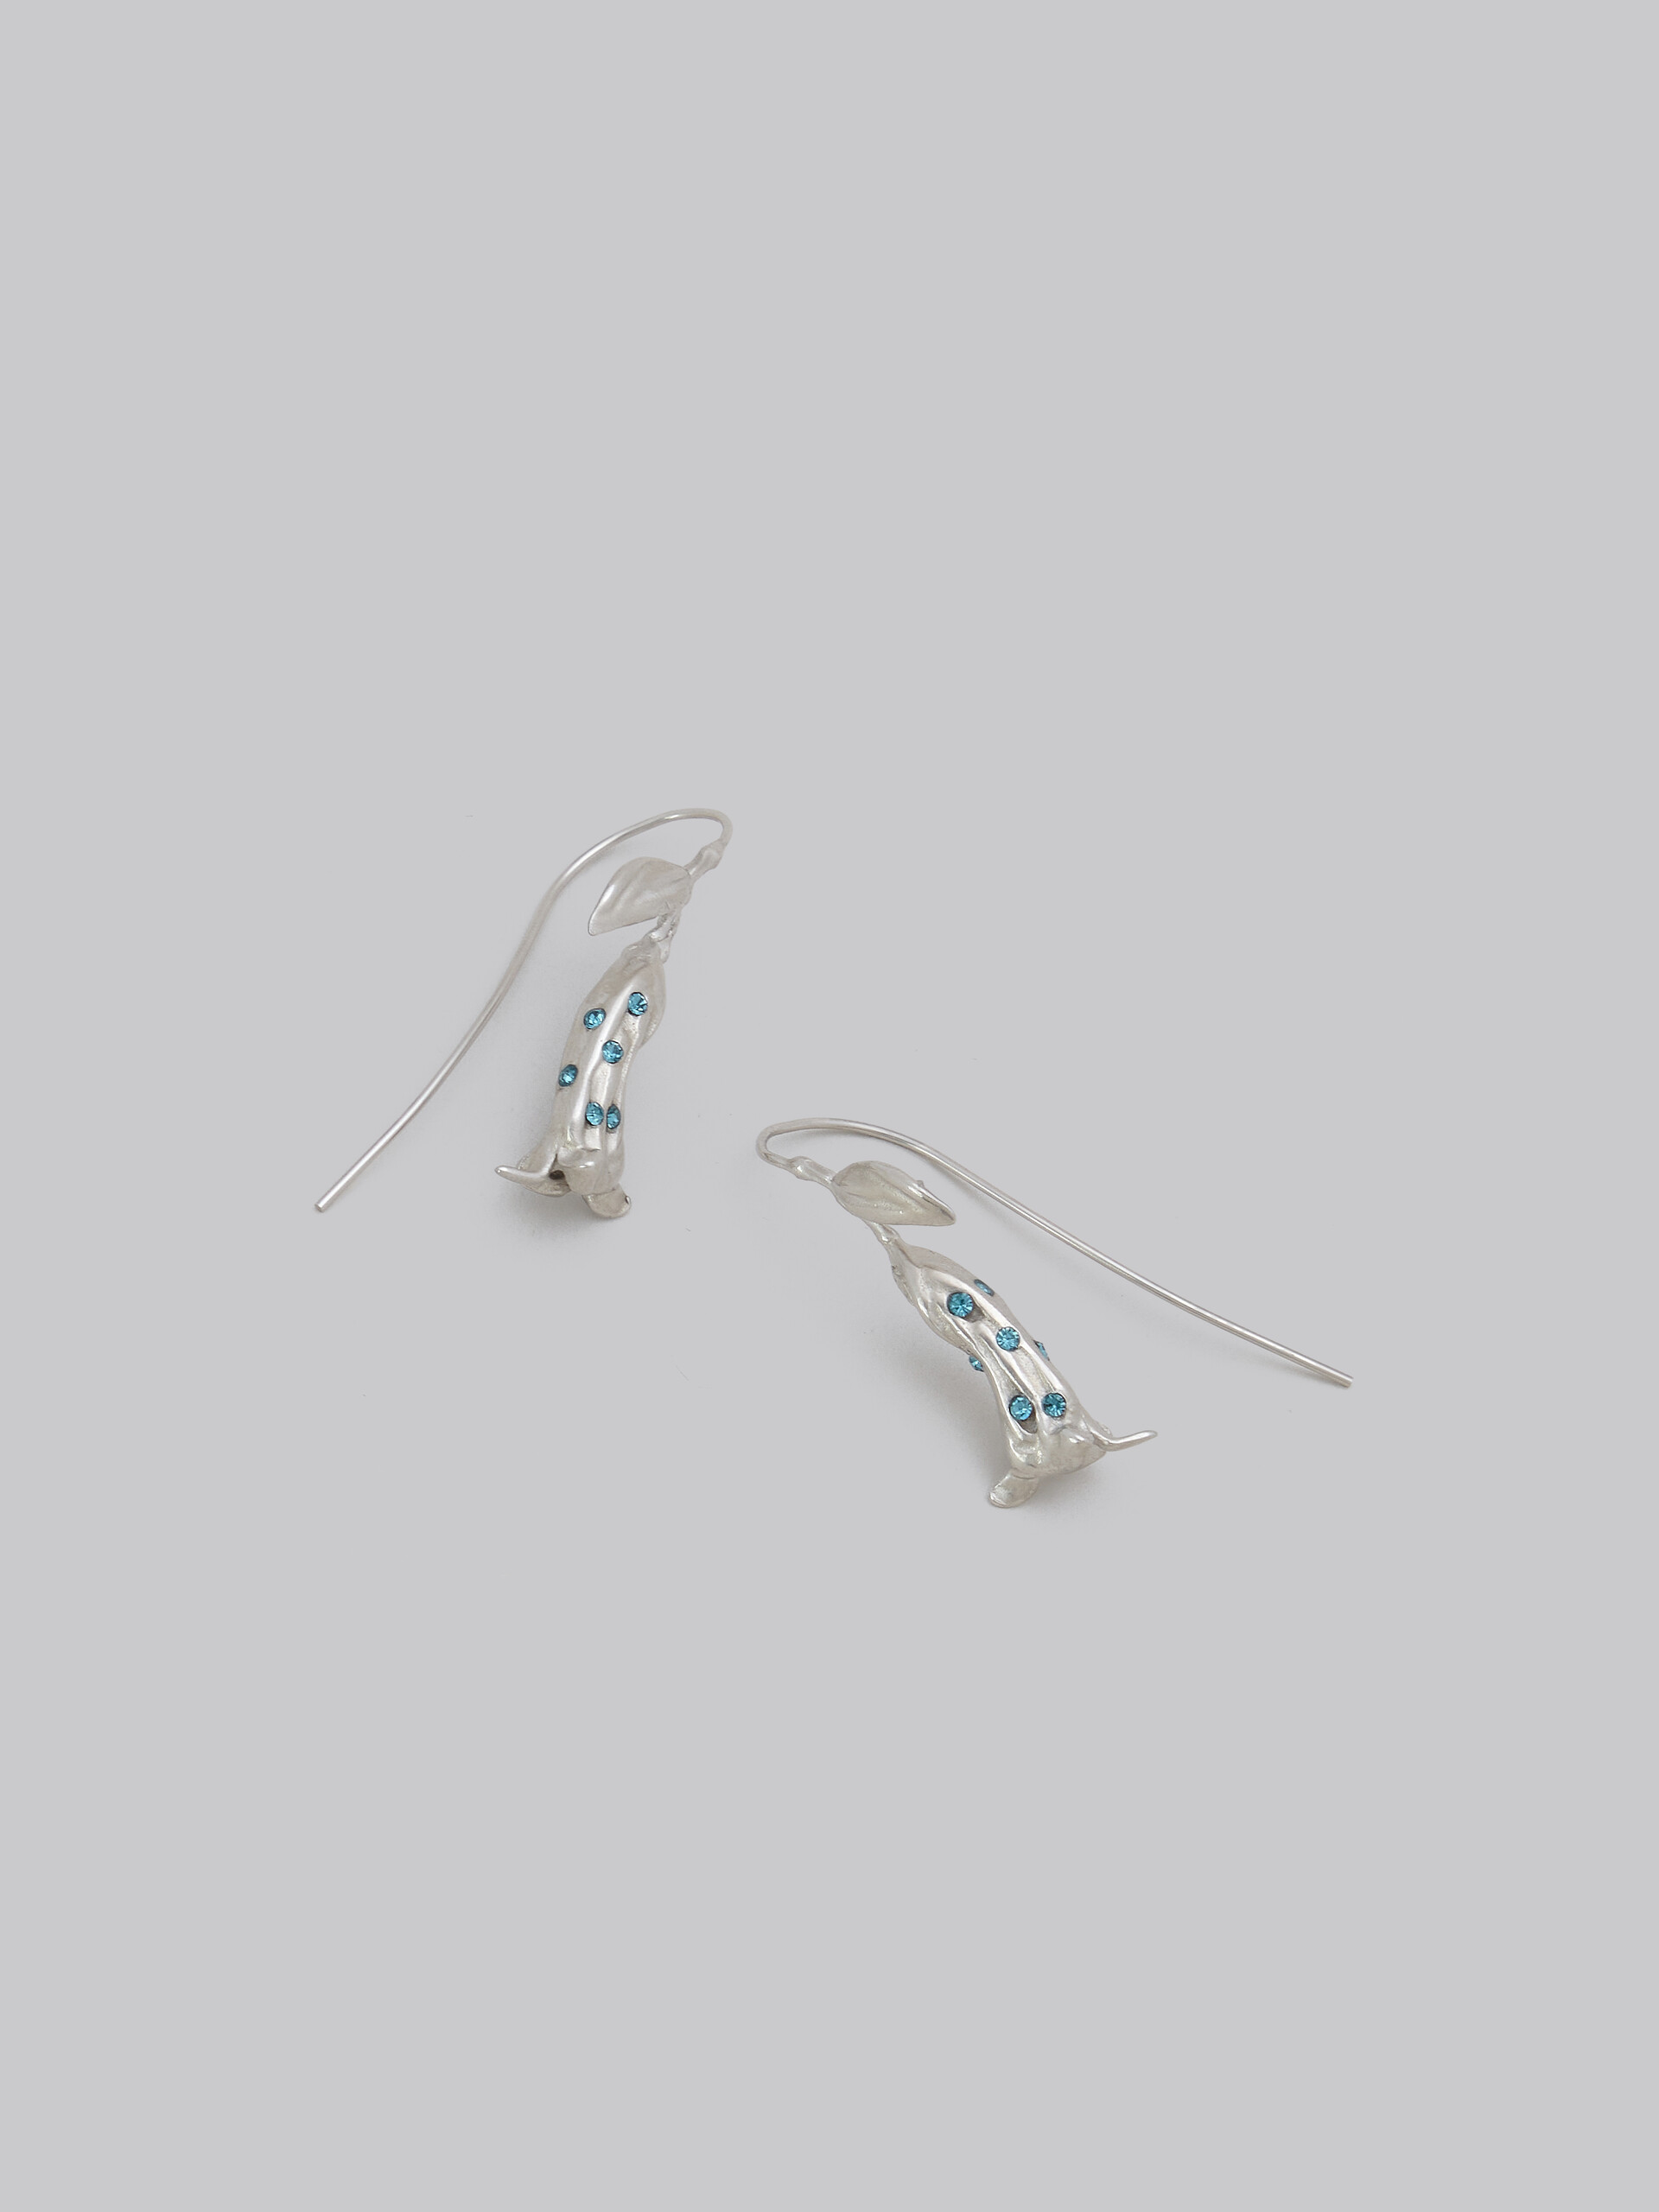 Metal calla lily earrings with crystals - Earrings - Image 4